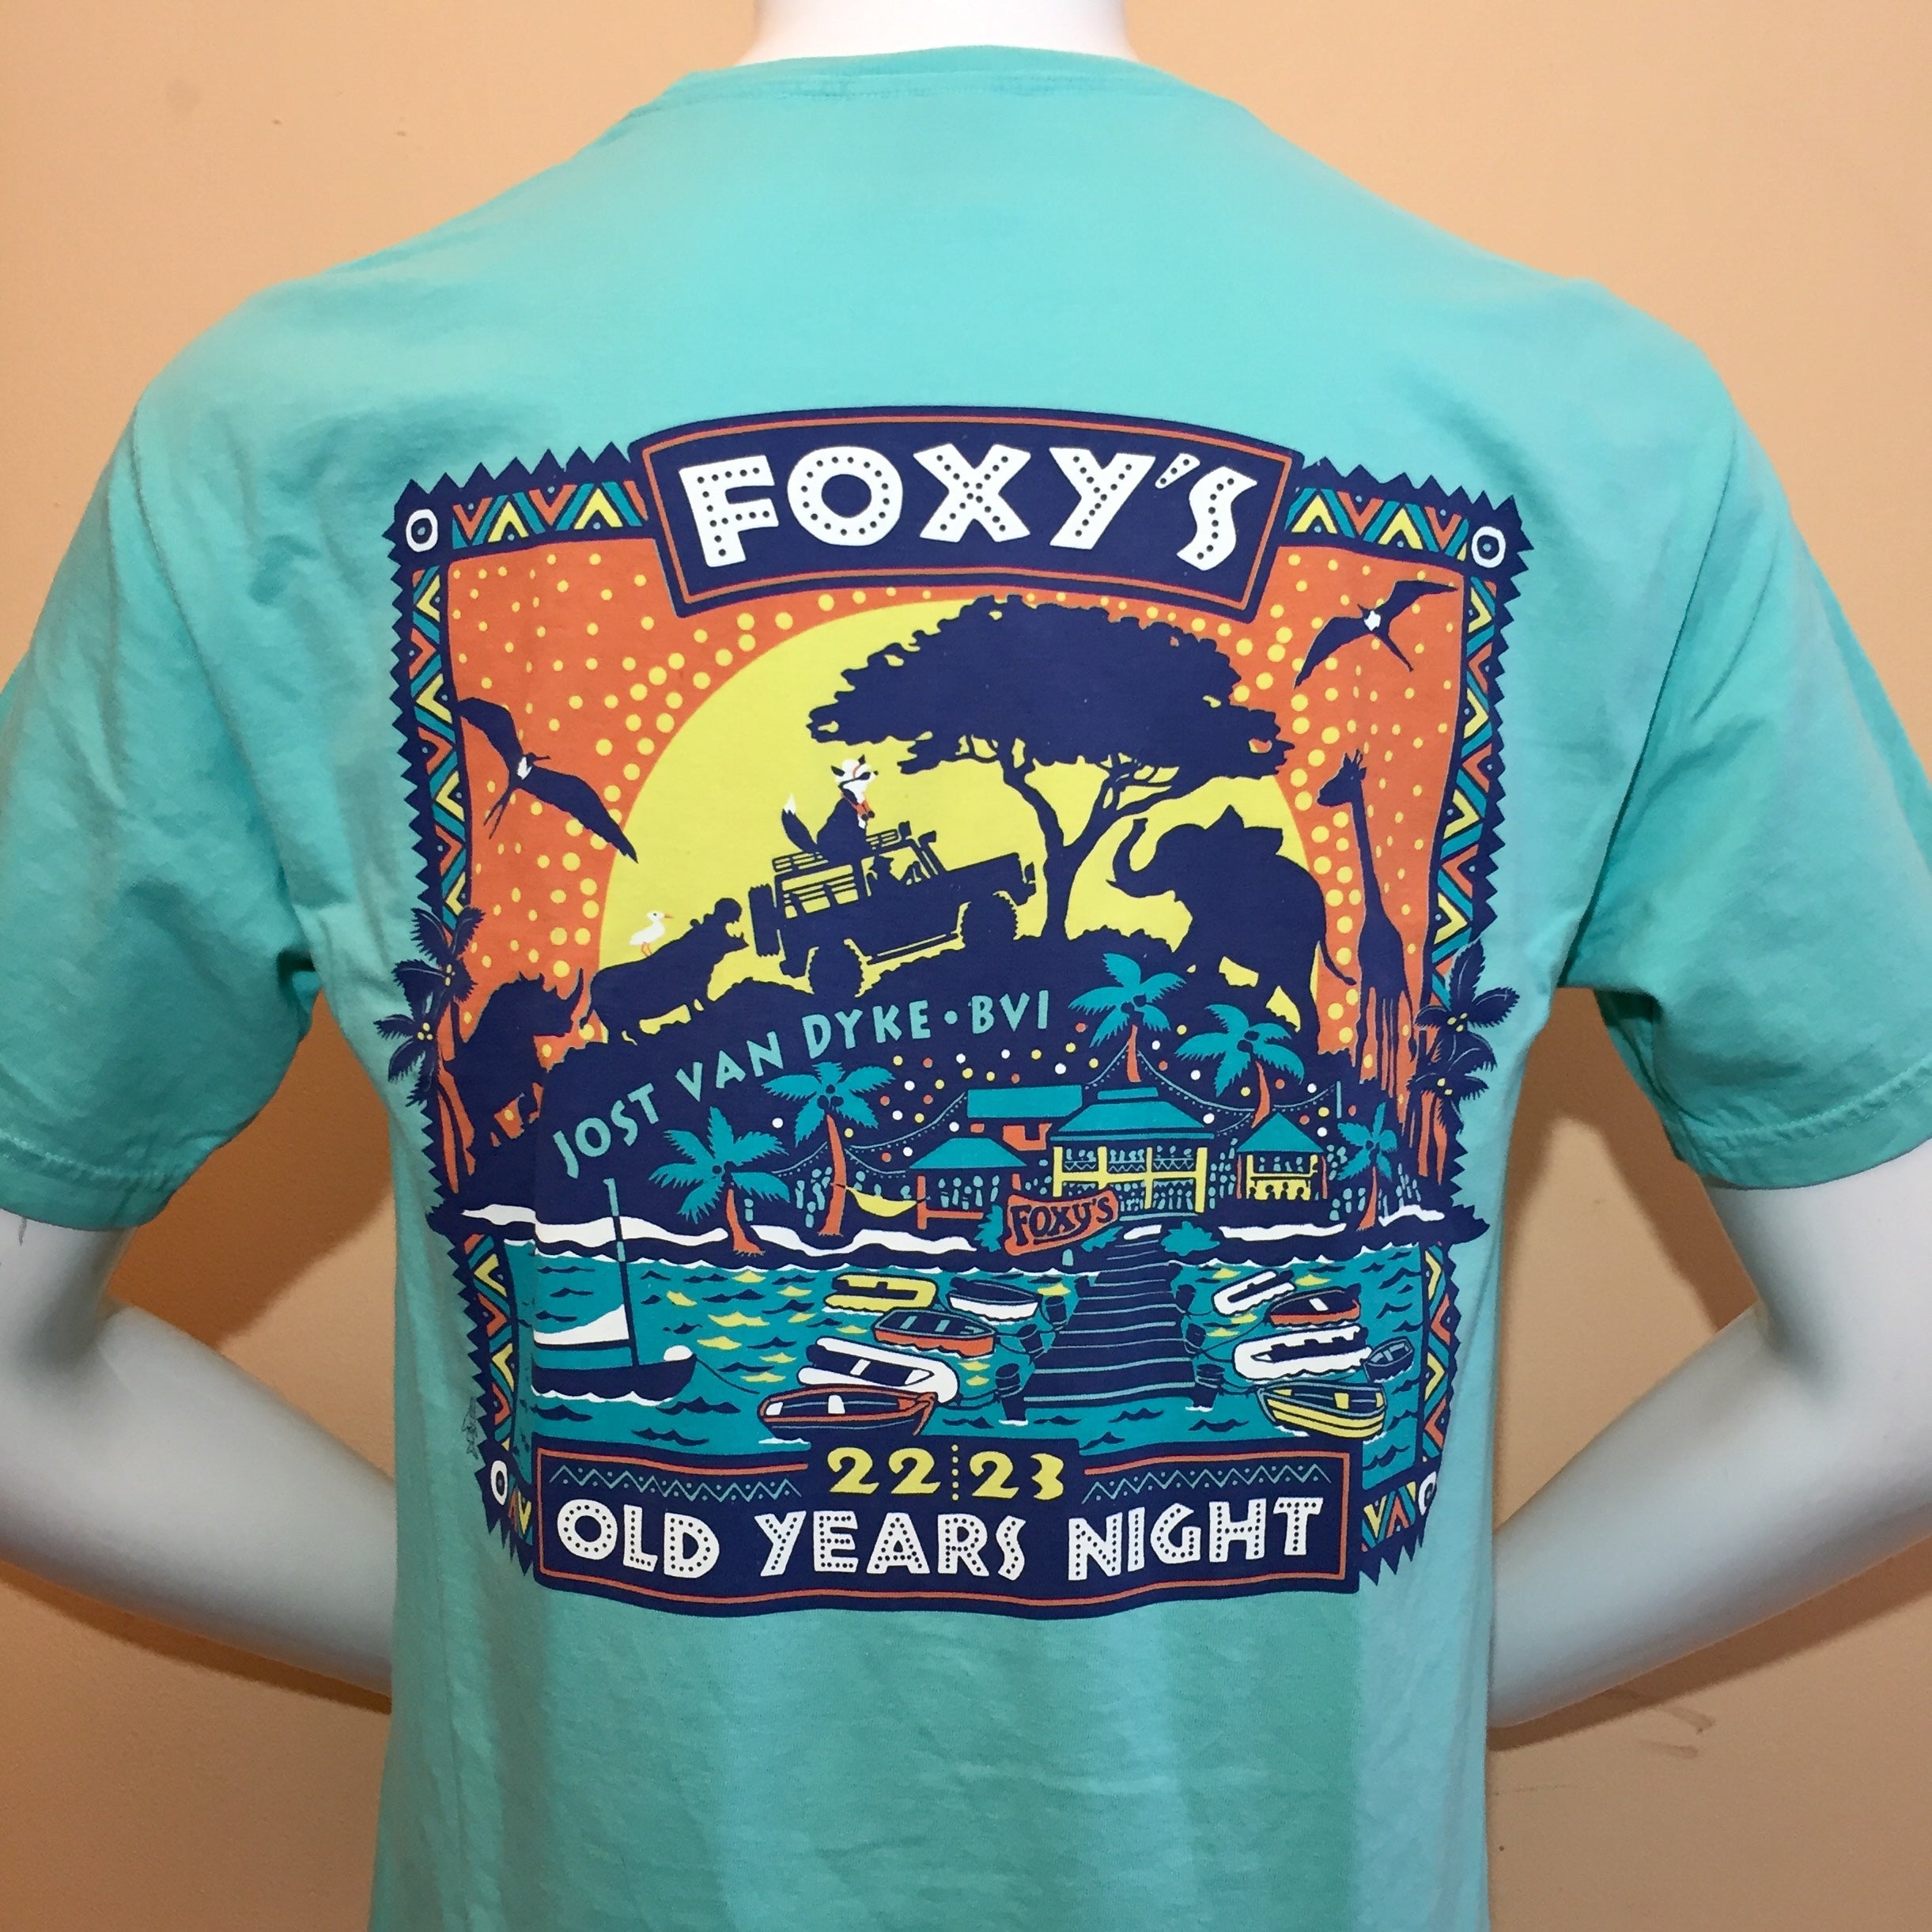 SALE Foxy's Old Year's Night Event Tee 22-23 'African Safari' Short Sleeve from Flying Fish